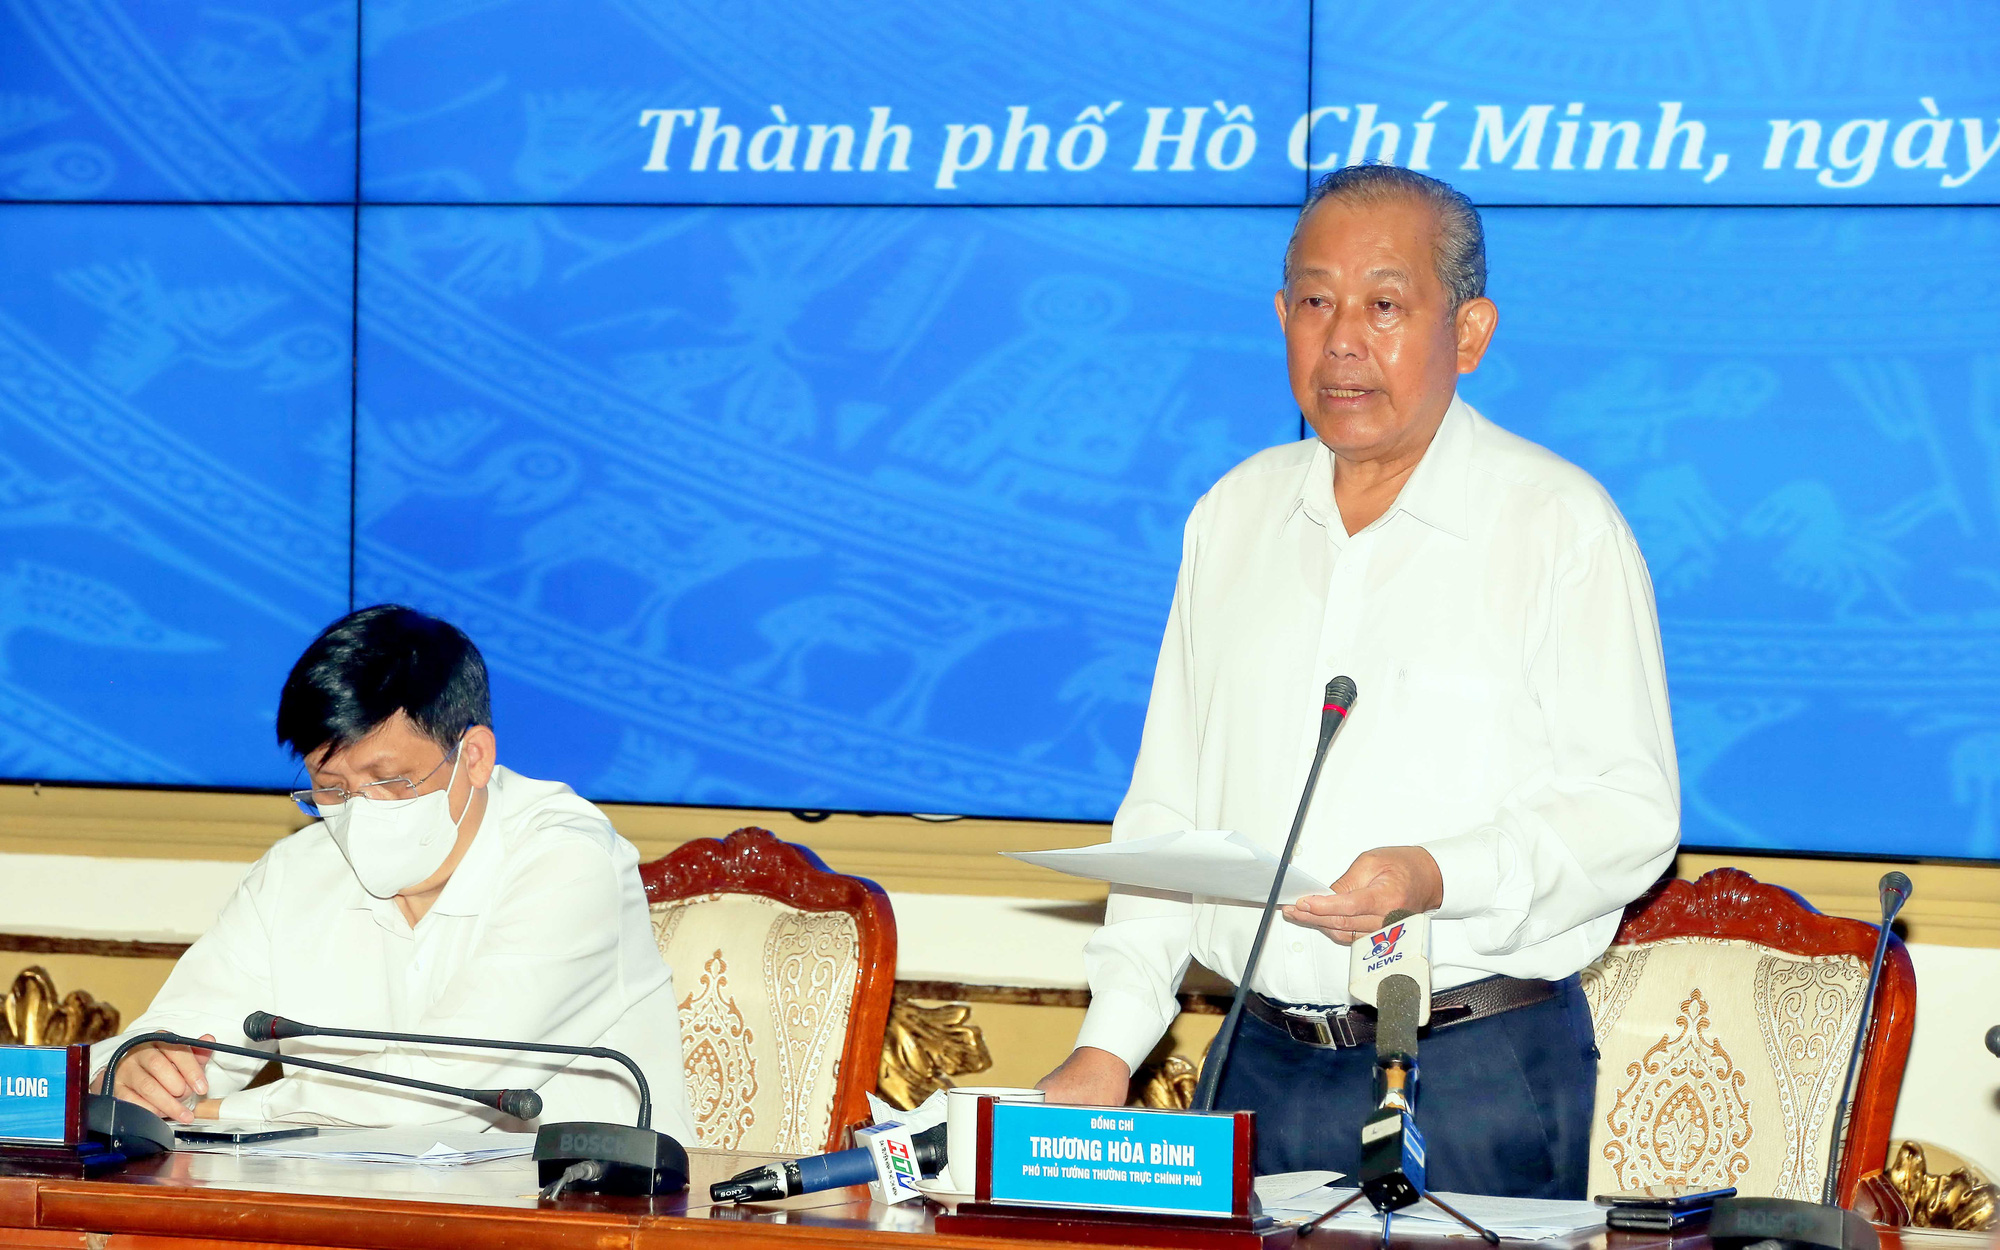 Ho Chi Minh City must activate COVID-19 prevention system at highest level: health minister